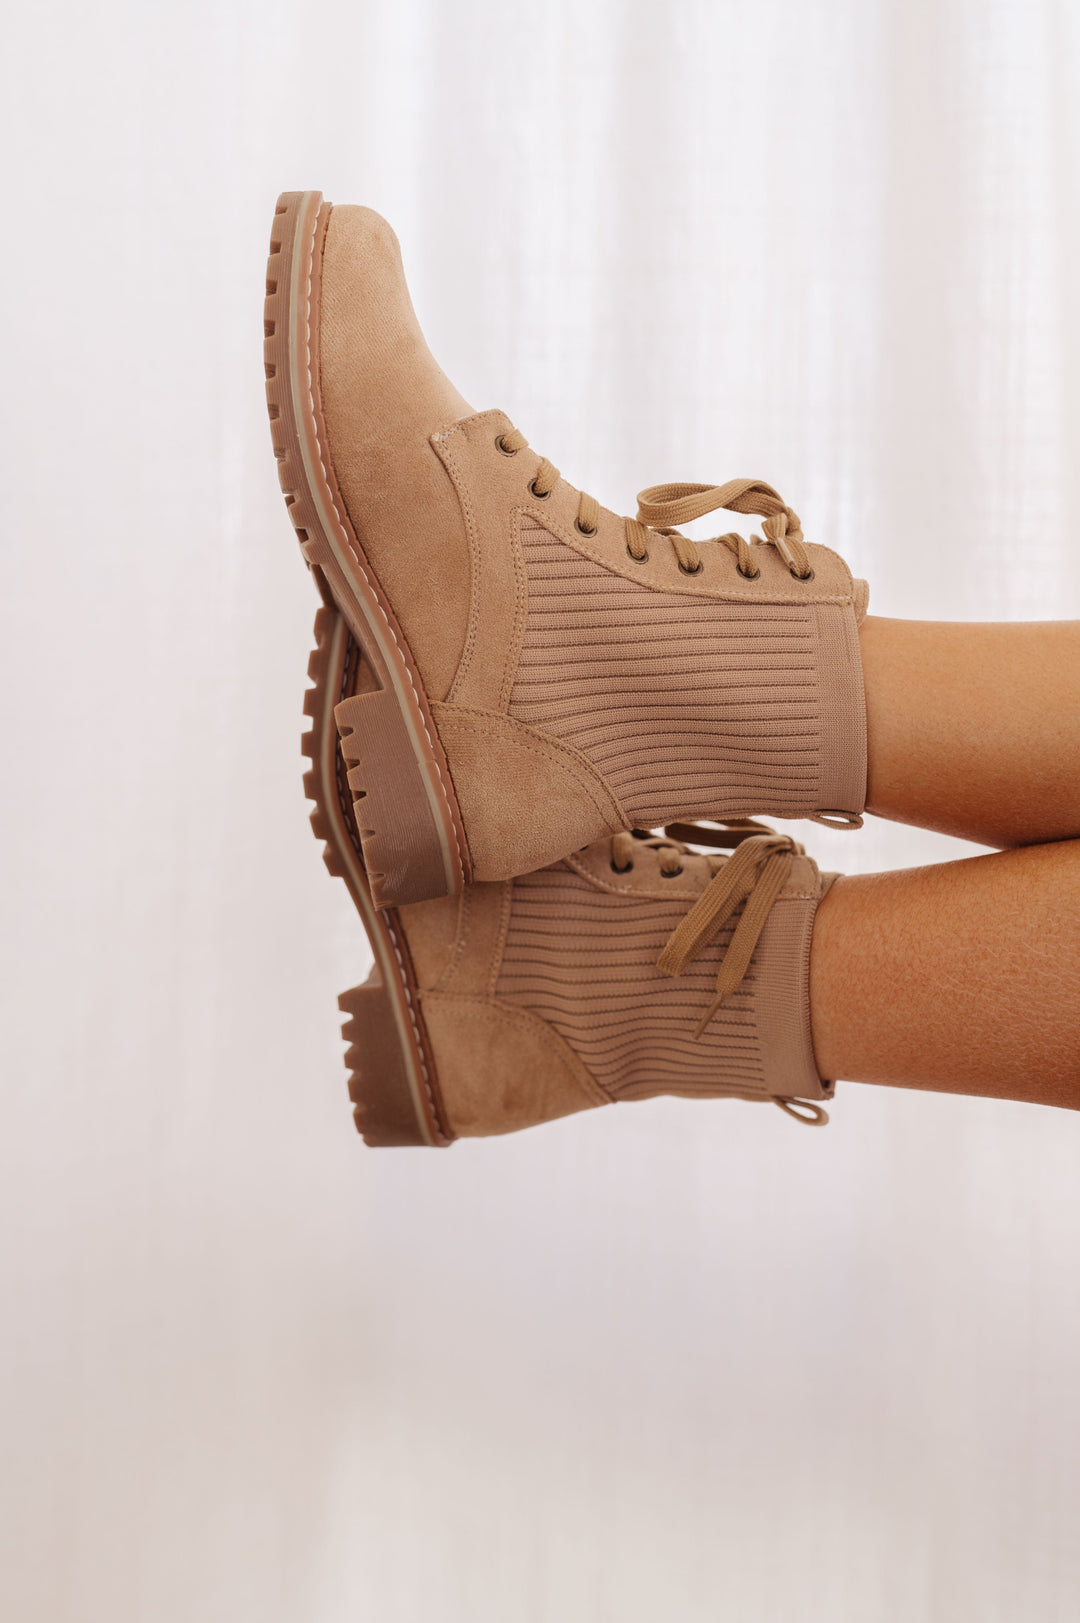 Made for Walking Lace Up Boots By Corkys - OW *FINAL SALE*